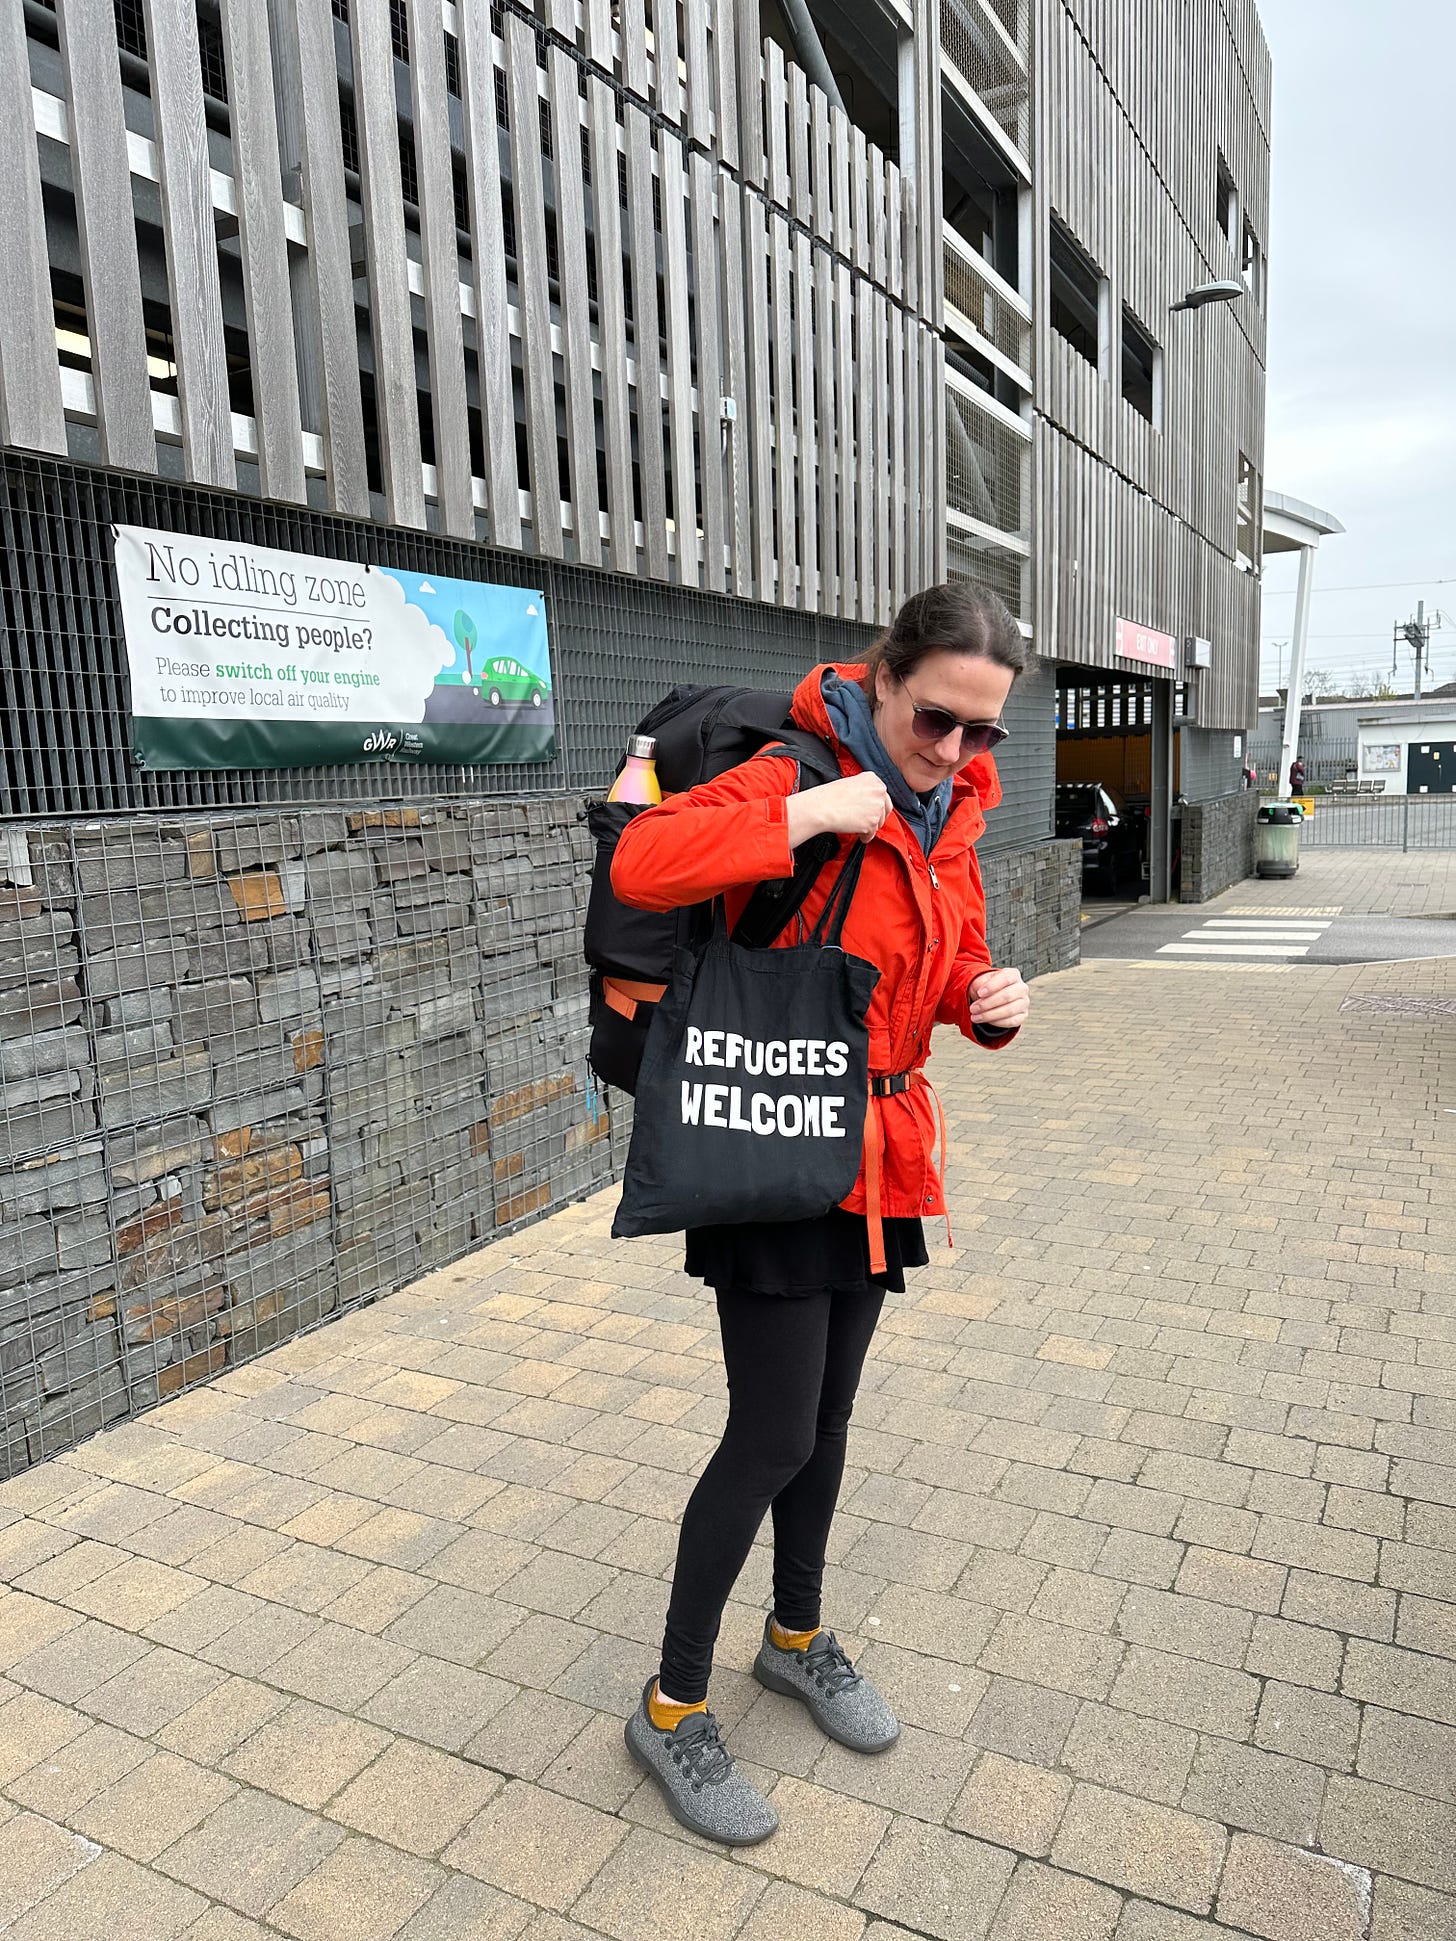 I am standing outside what is a 70s ? train station wearing sunglasses and a bright orange coat and black leggings and a black backpack and I am holding a black tote bag that says refugees welcome on it. 